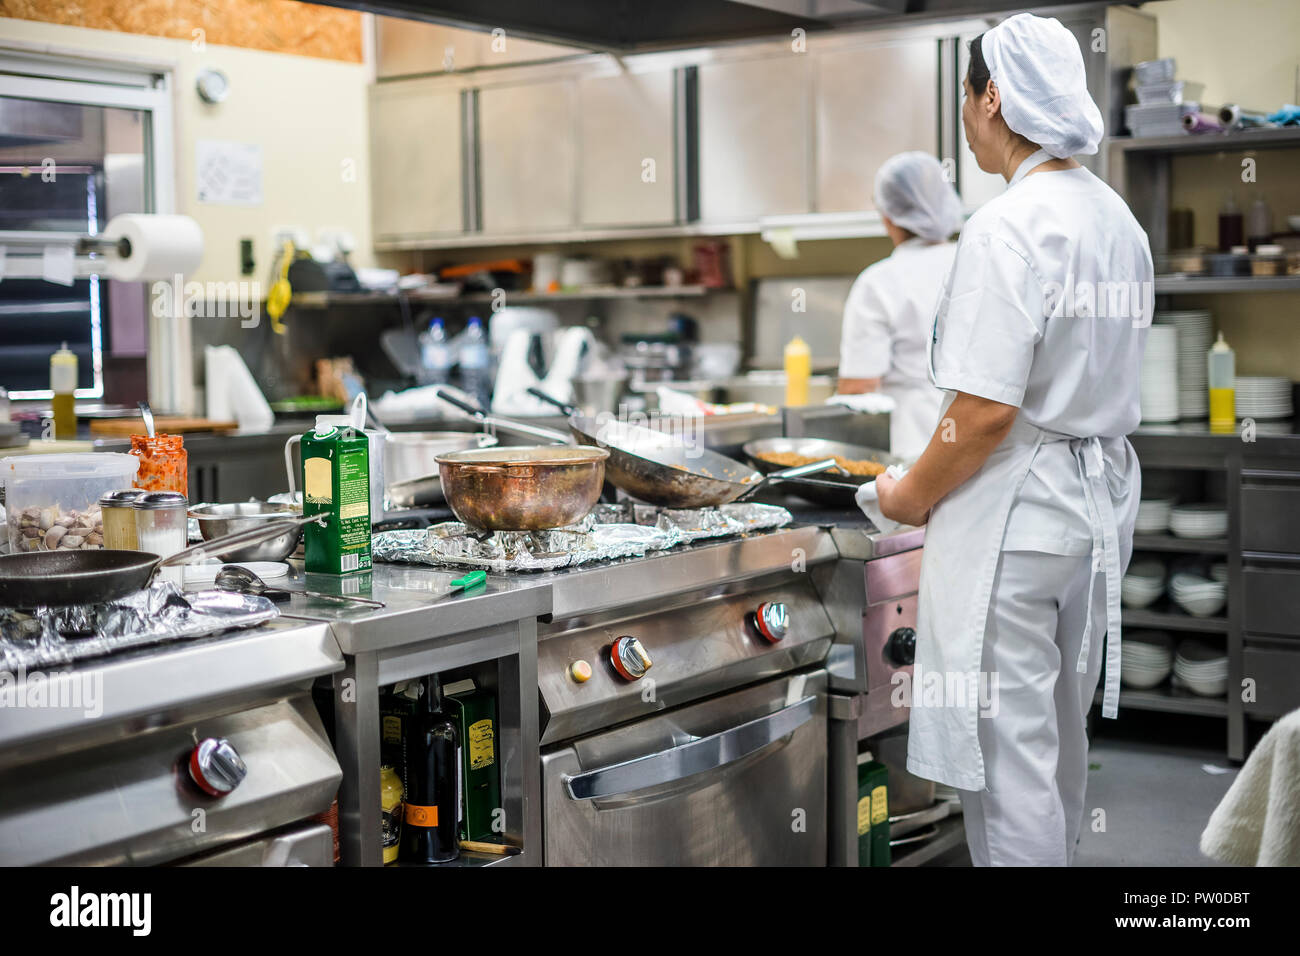 Kitchen staff busy with preparing food during lunch time in the restaurant Stock Photo